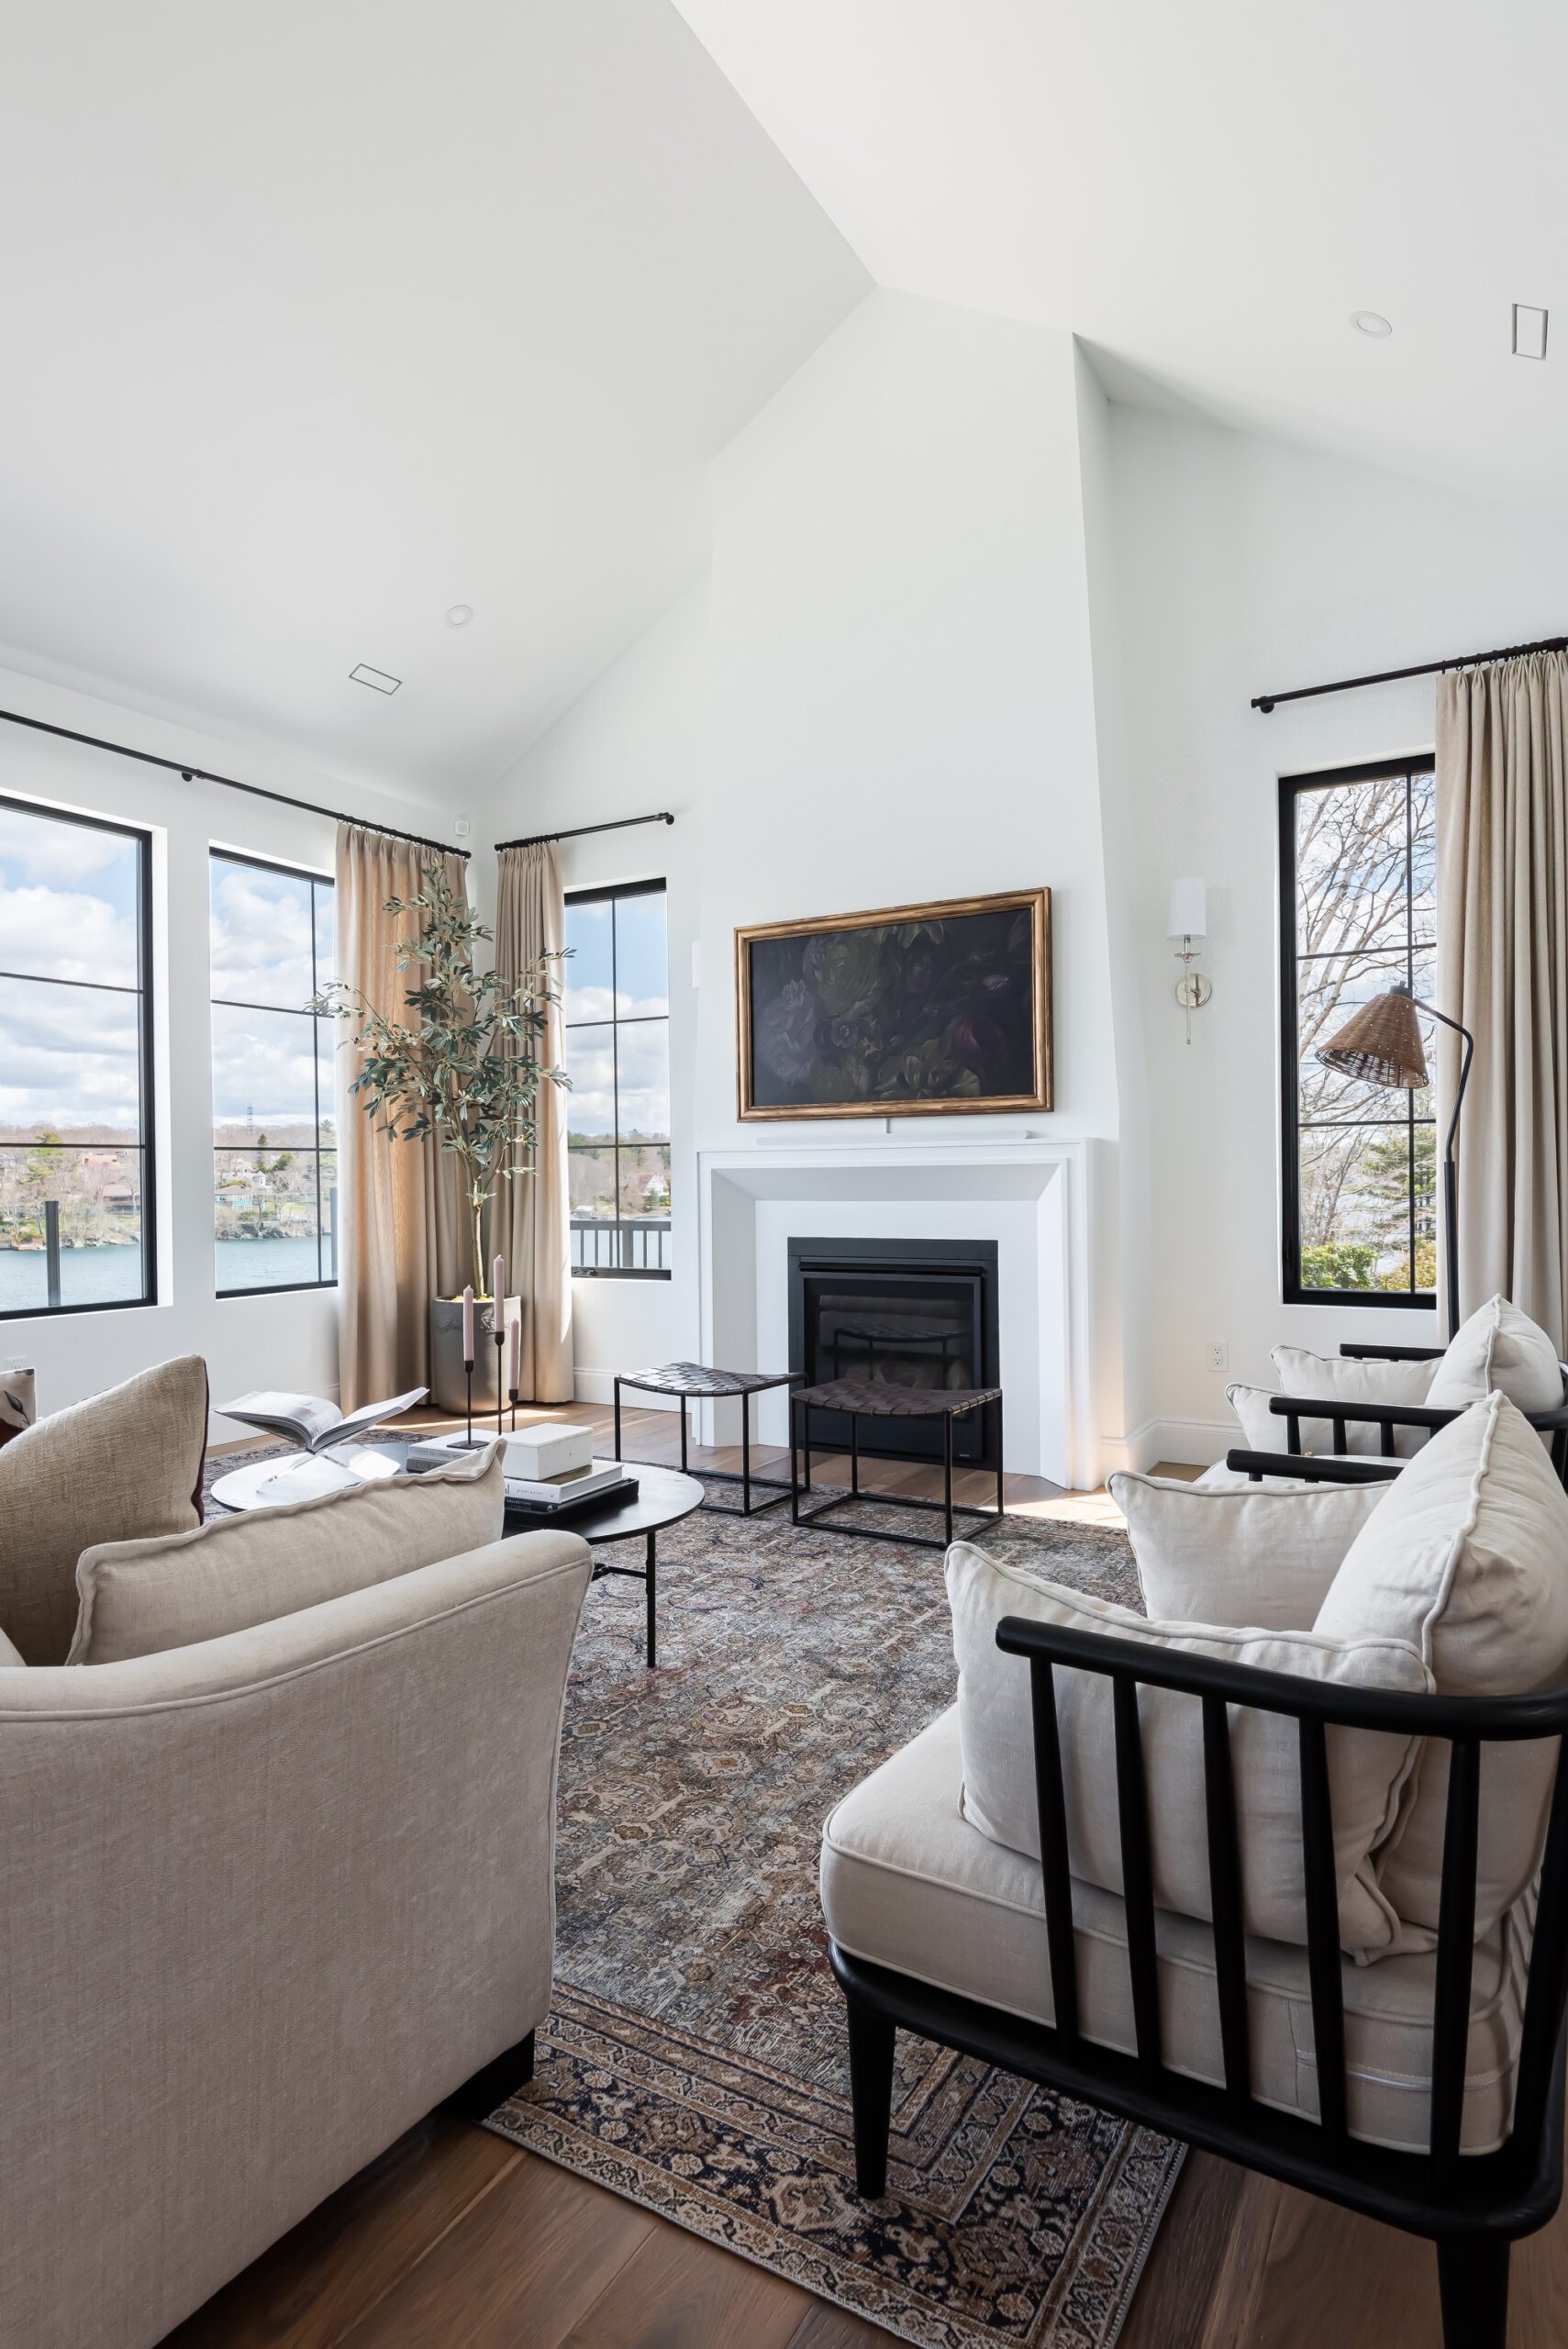 A beautiful interior image of the main living area at Boscobel on the Arm, featuring stunning views and an airy feel 